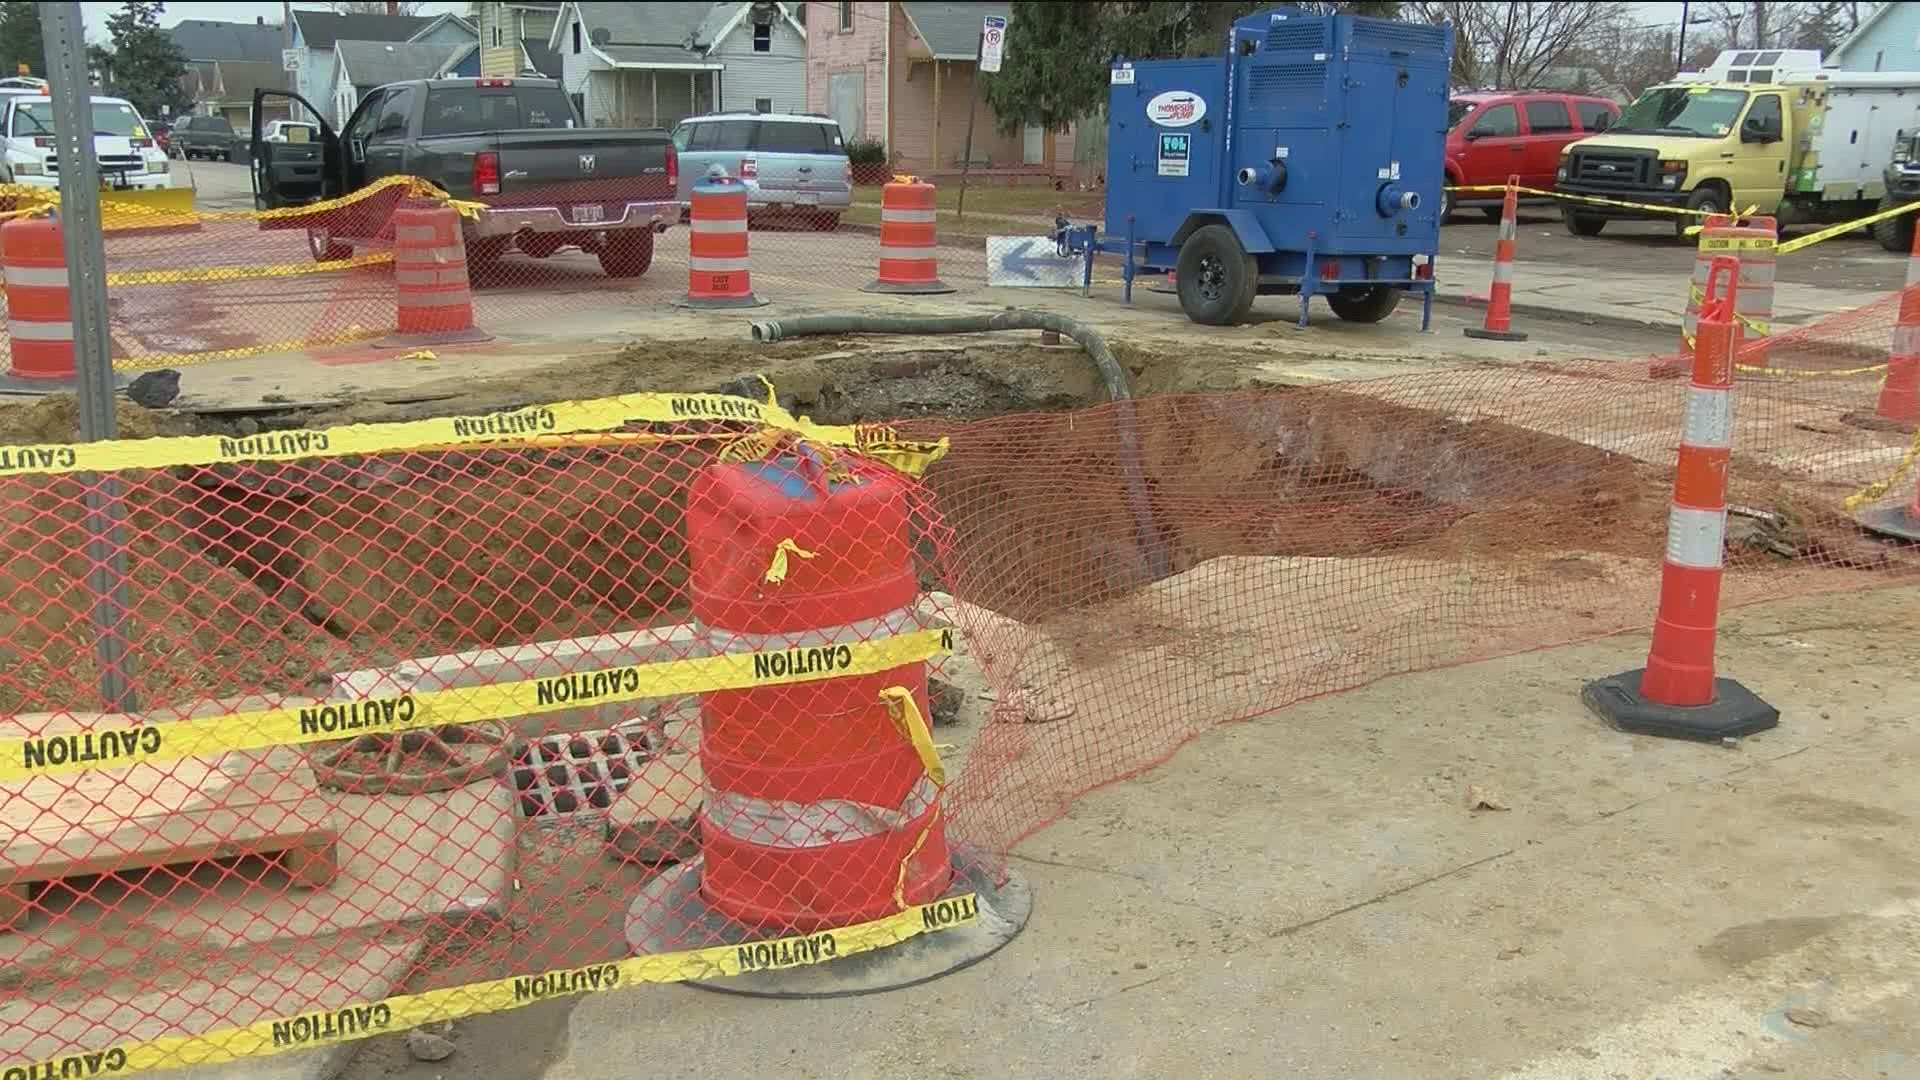 The break is now being called a water system failure, city official Ed Moore said. The piping, installed in 1931, that caused the flooding, has since been replaced.